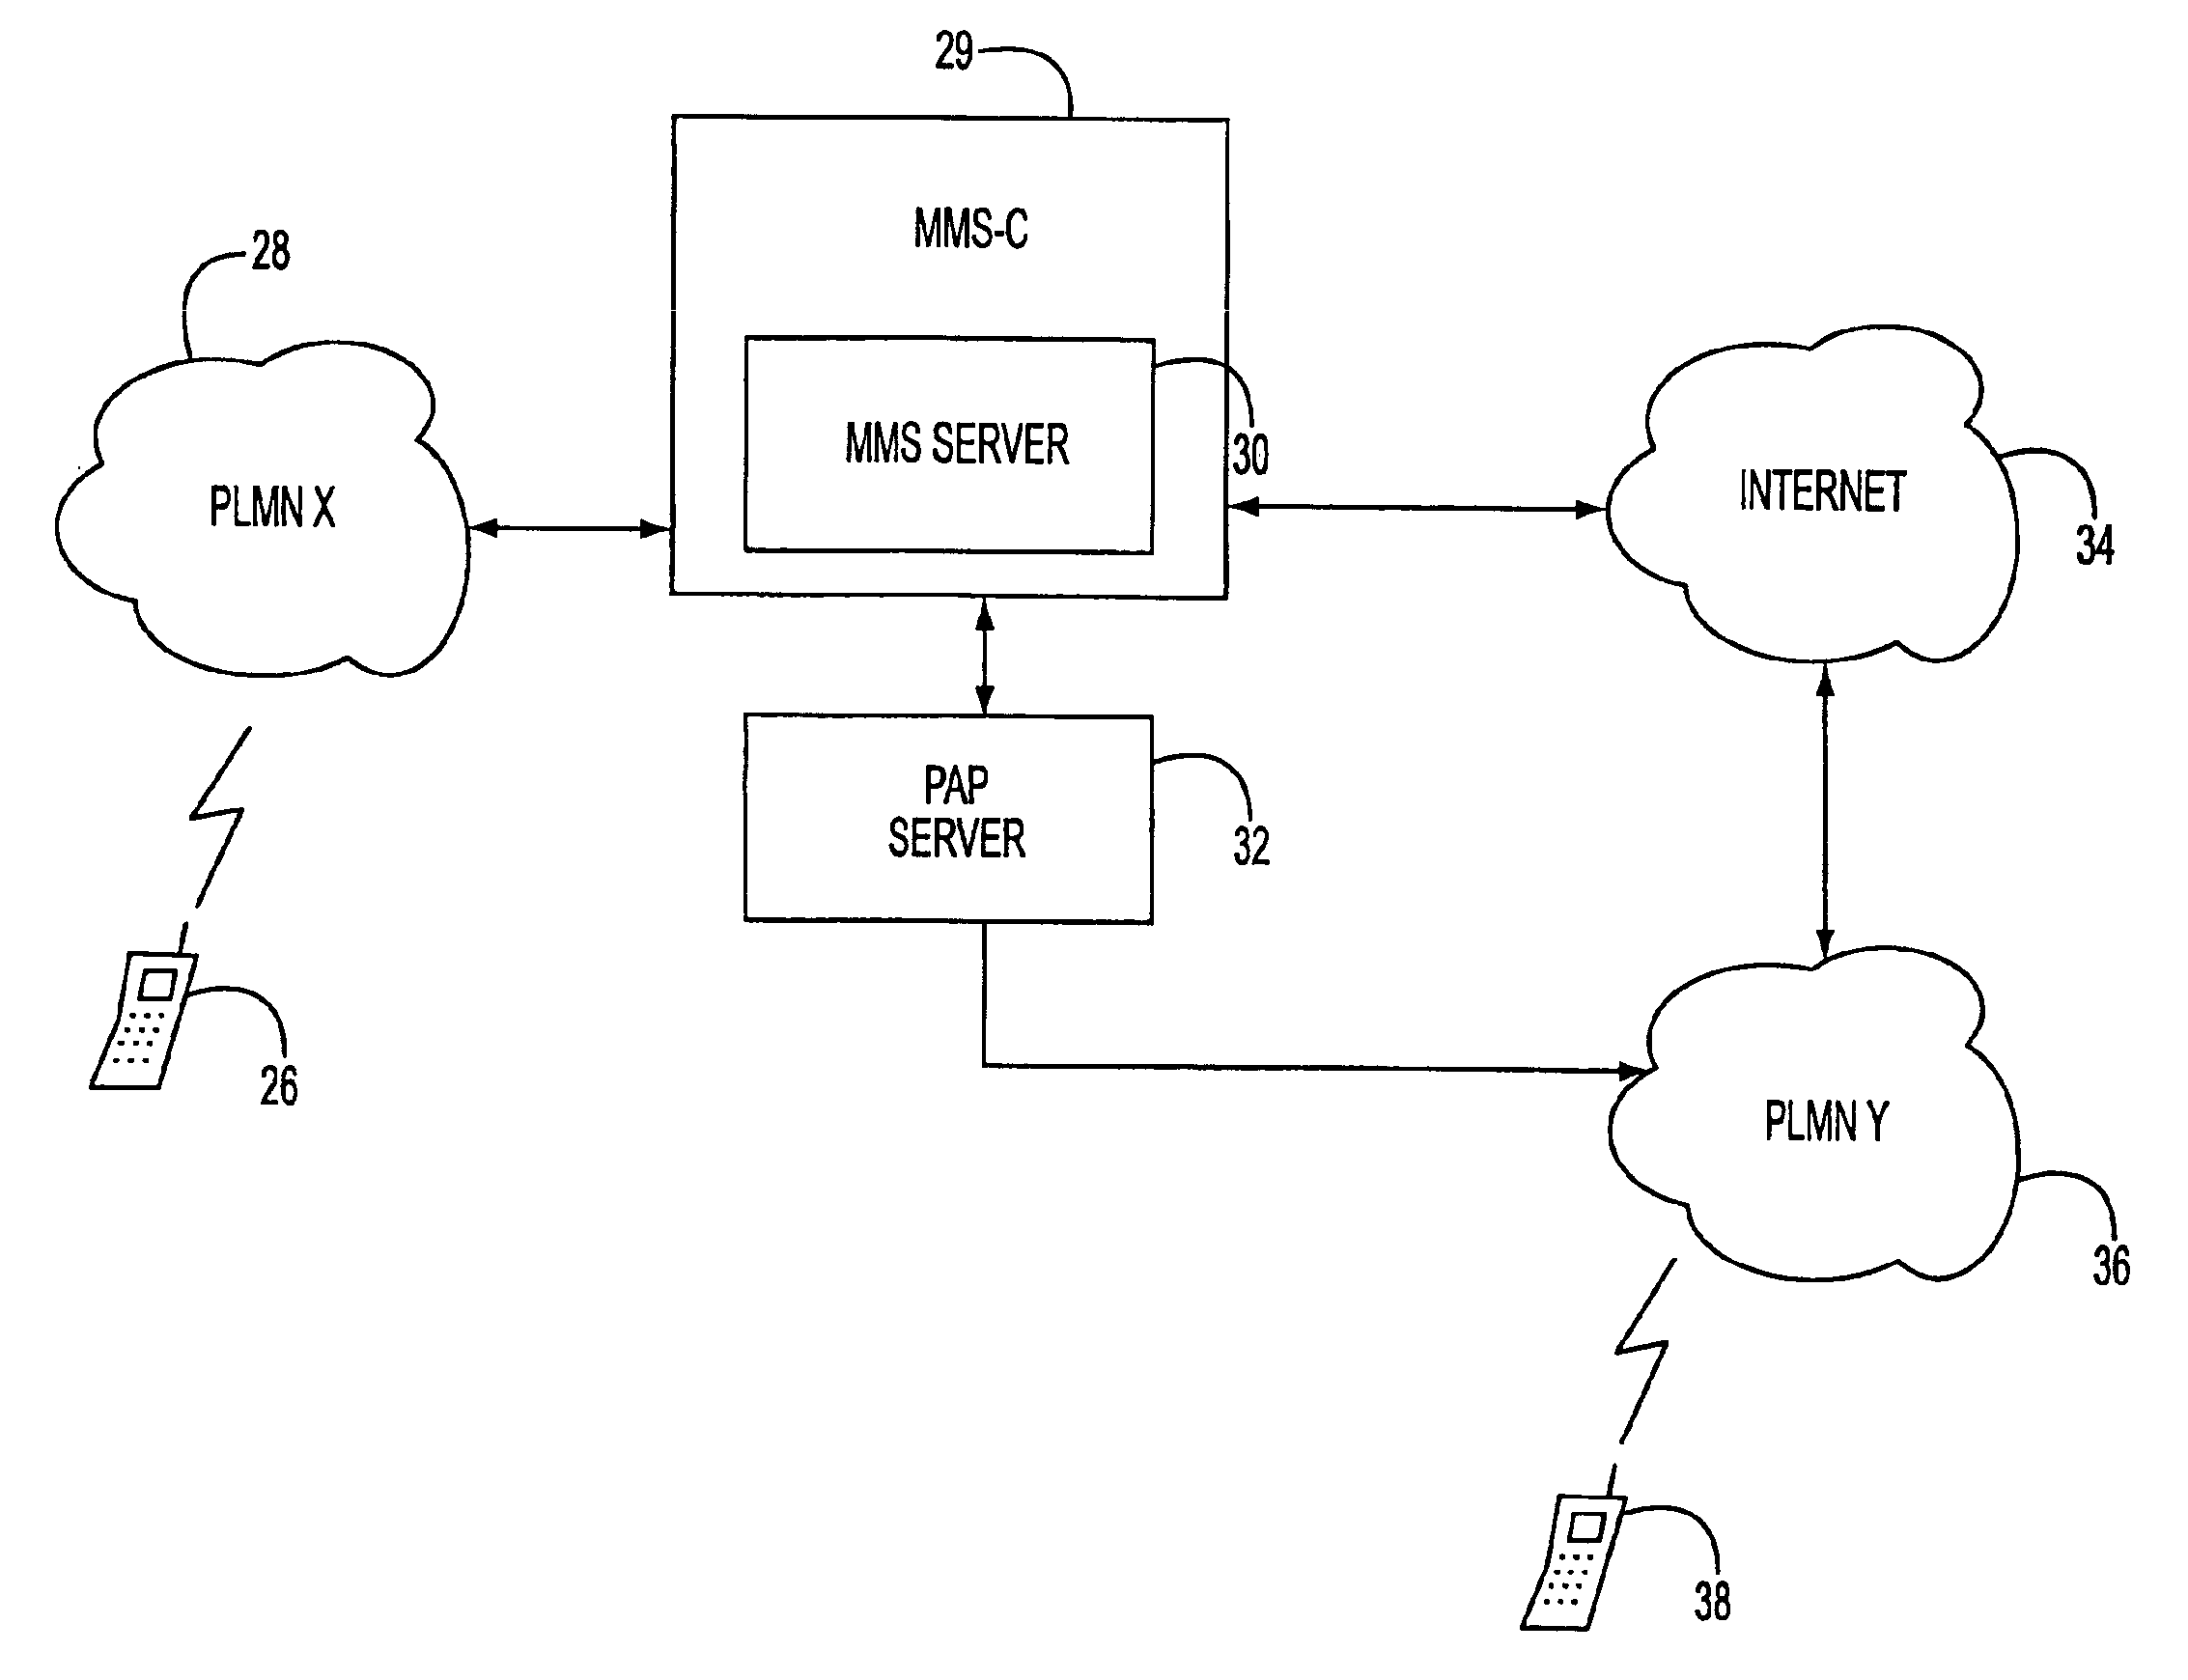 Multimedia messaging service routing system and method